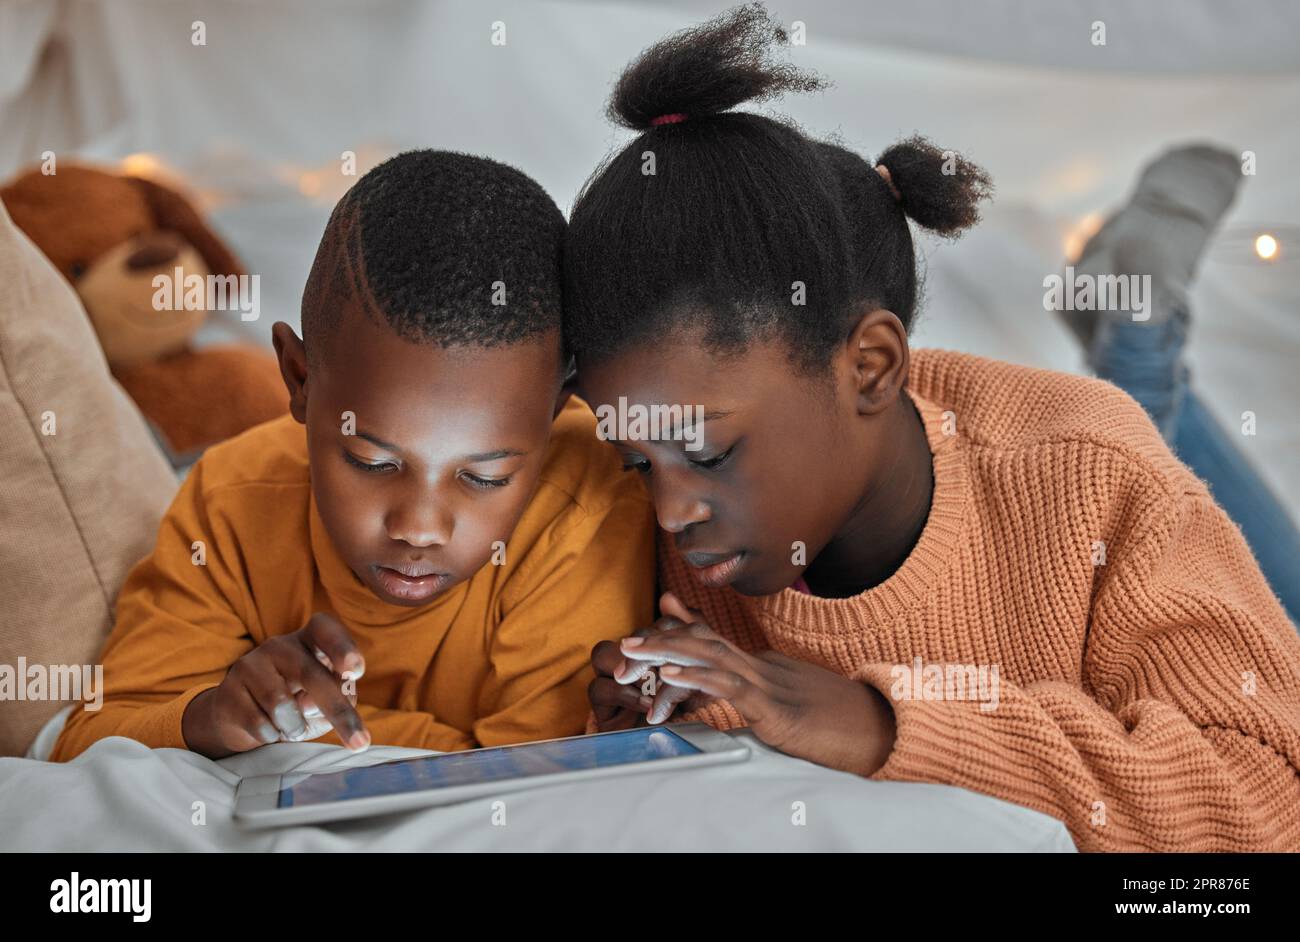 We can play this game together. a brother and sister using a digital tablet together at home. Stock Photo